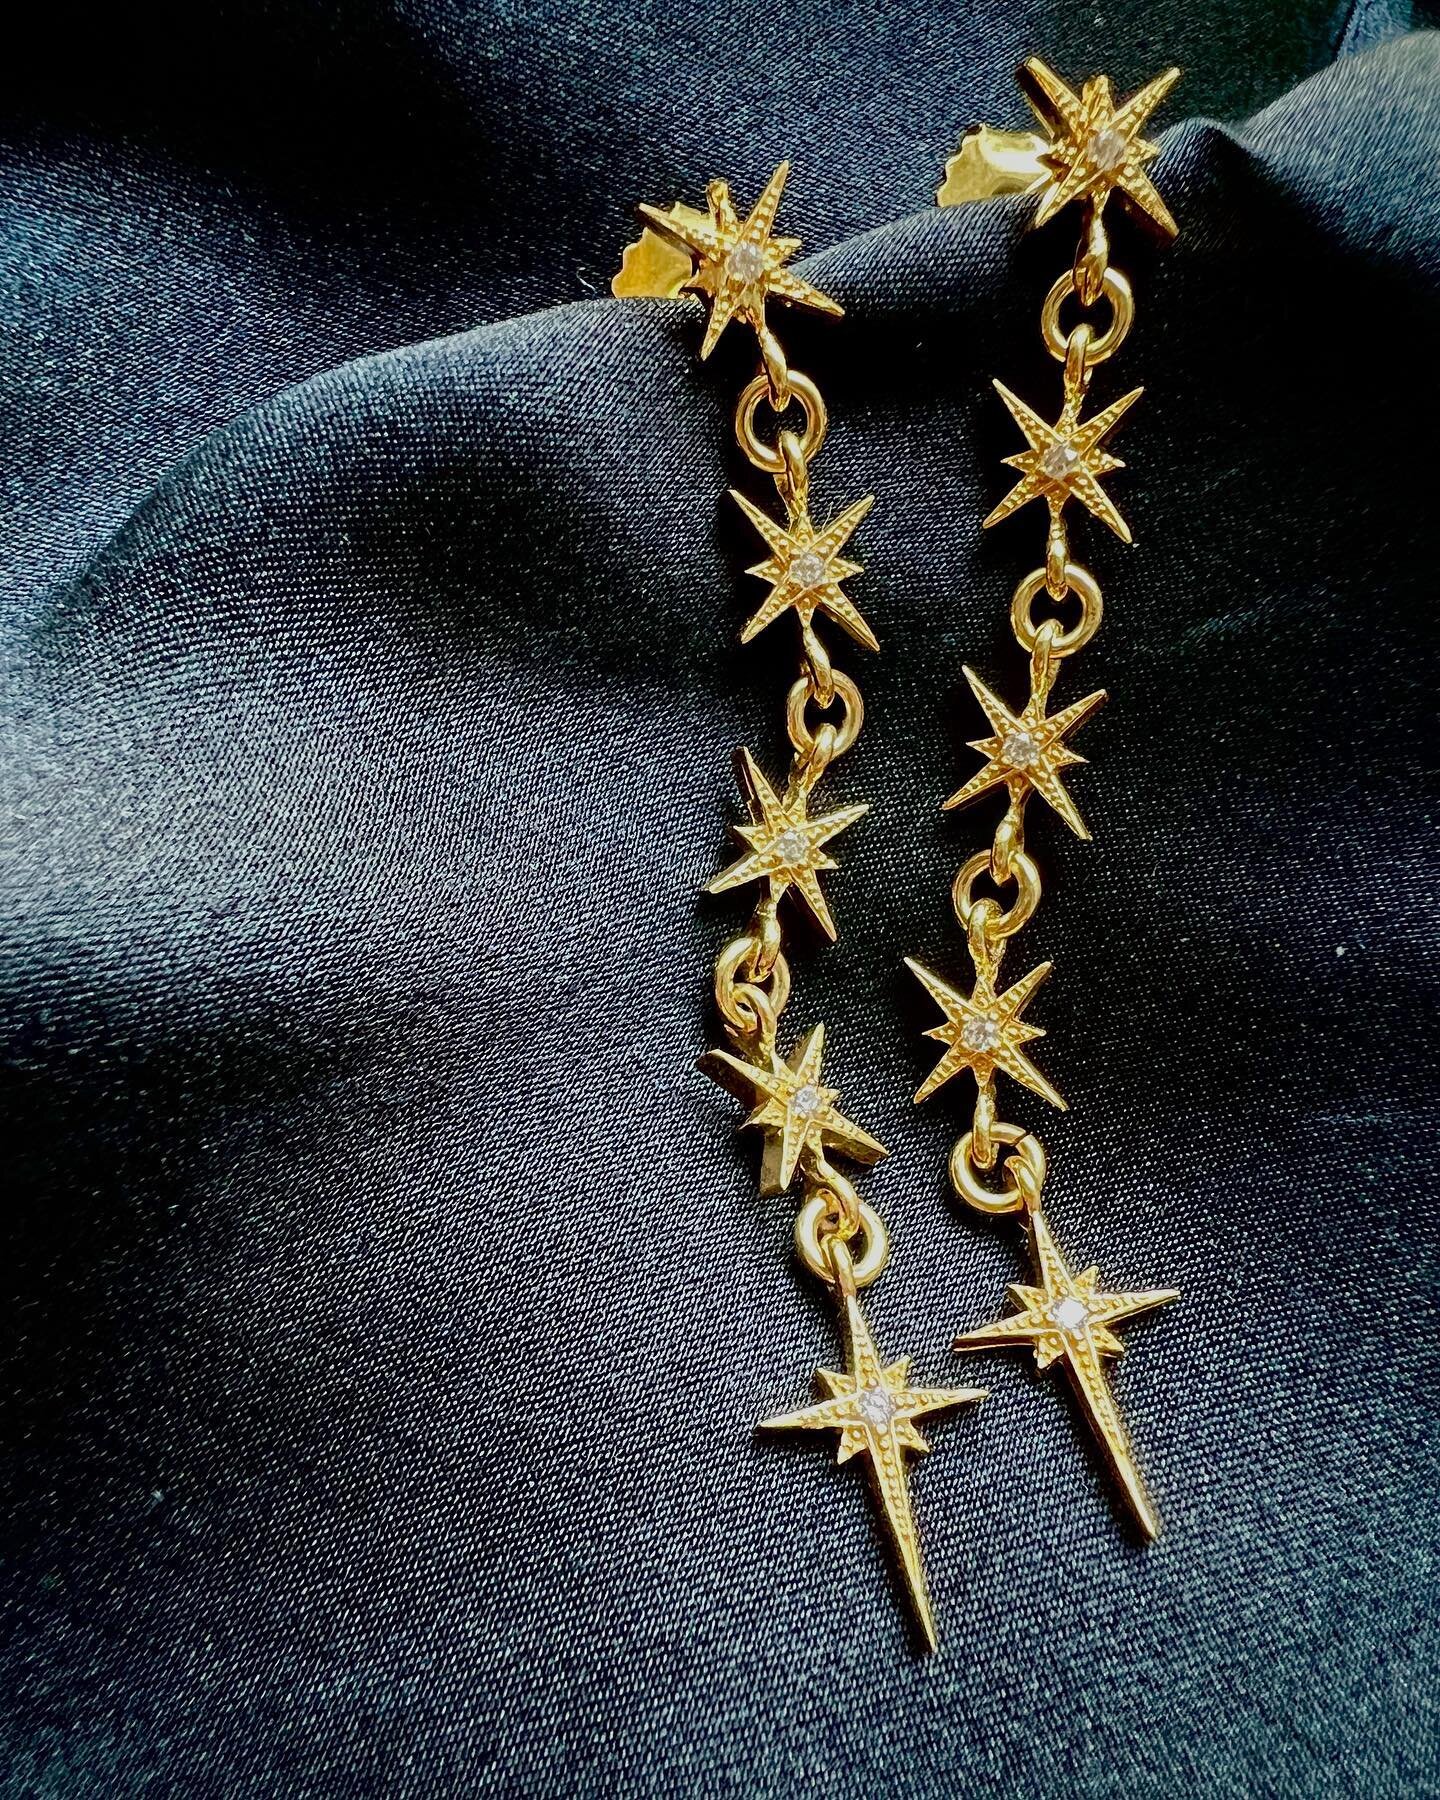 Delicate star dangle earrings that will elevate a sleek minimalistic outfit as it will to a boho frock ; equal parts versatile and statement-making 💫💫💫 Please do consider us for the festive season;whether a gift to yourself or a loved one🎄💝✨